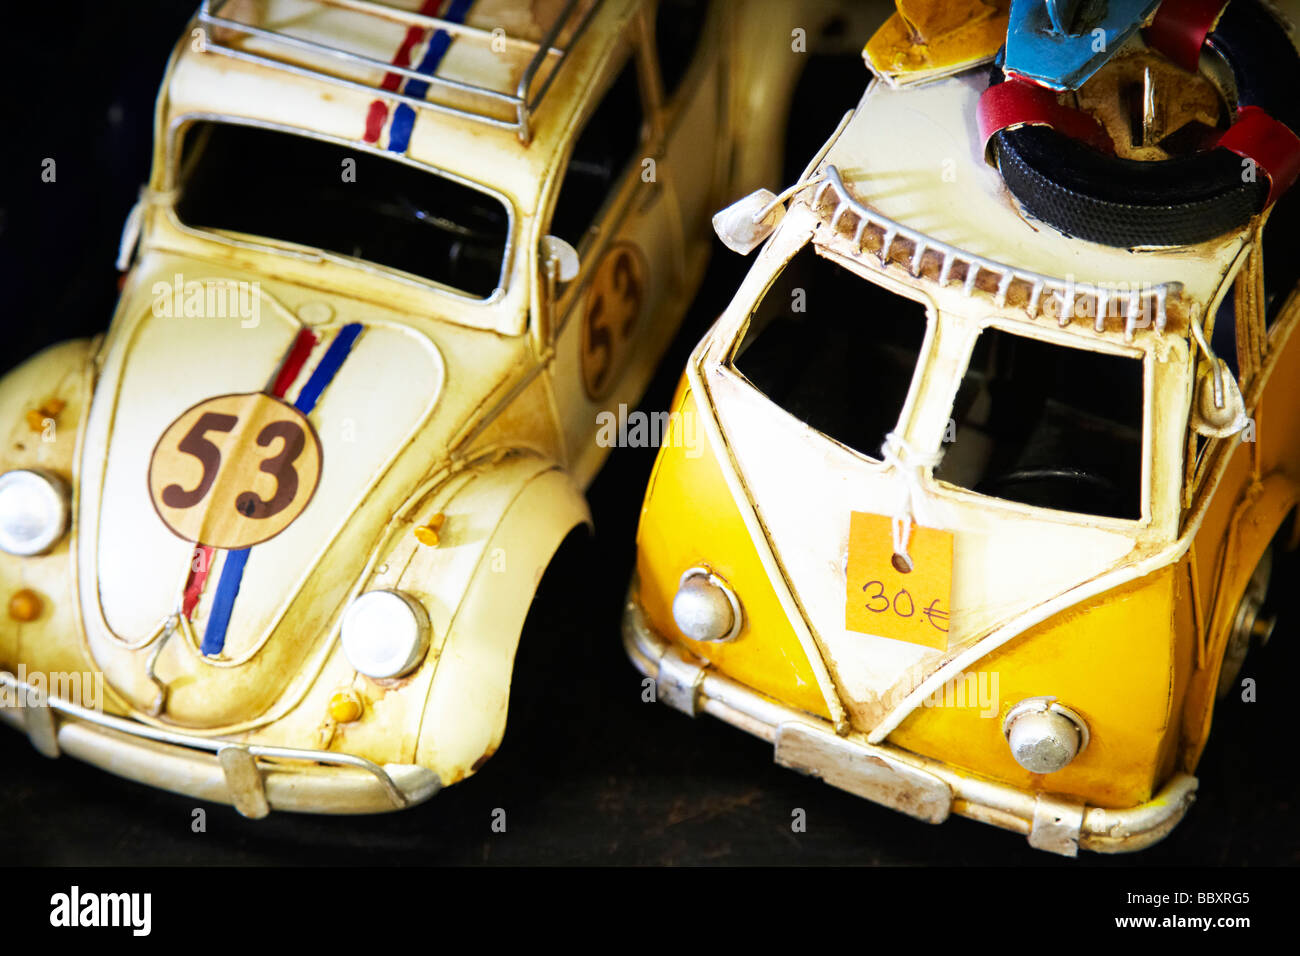 VW toy cars, old toy cars Stock Photo